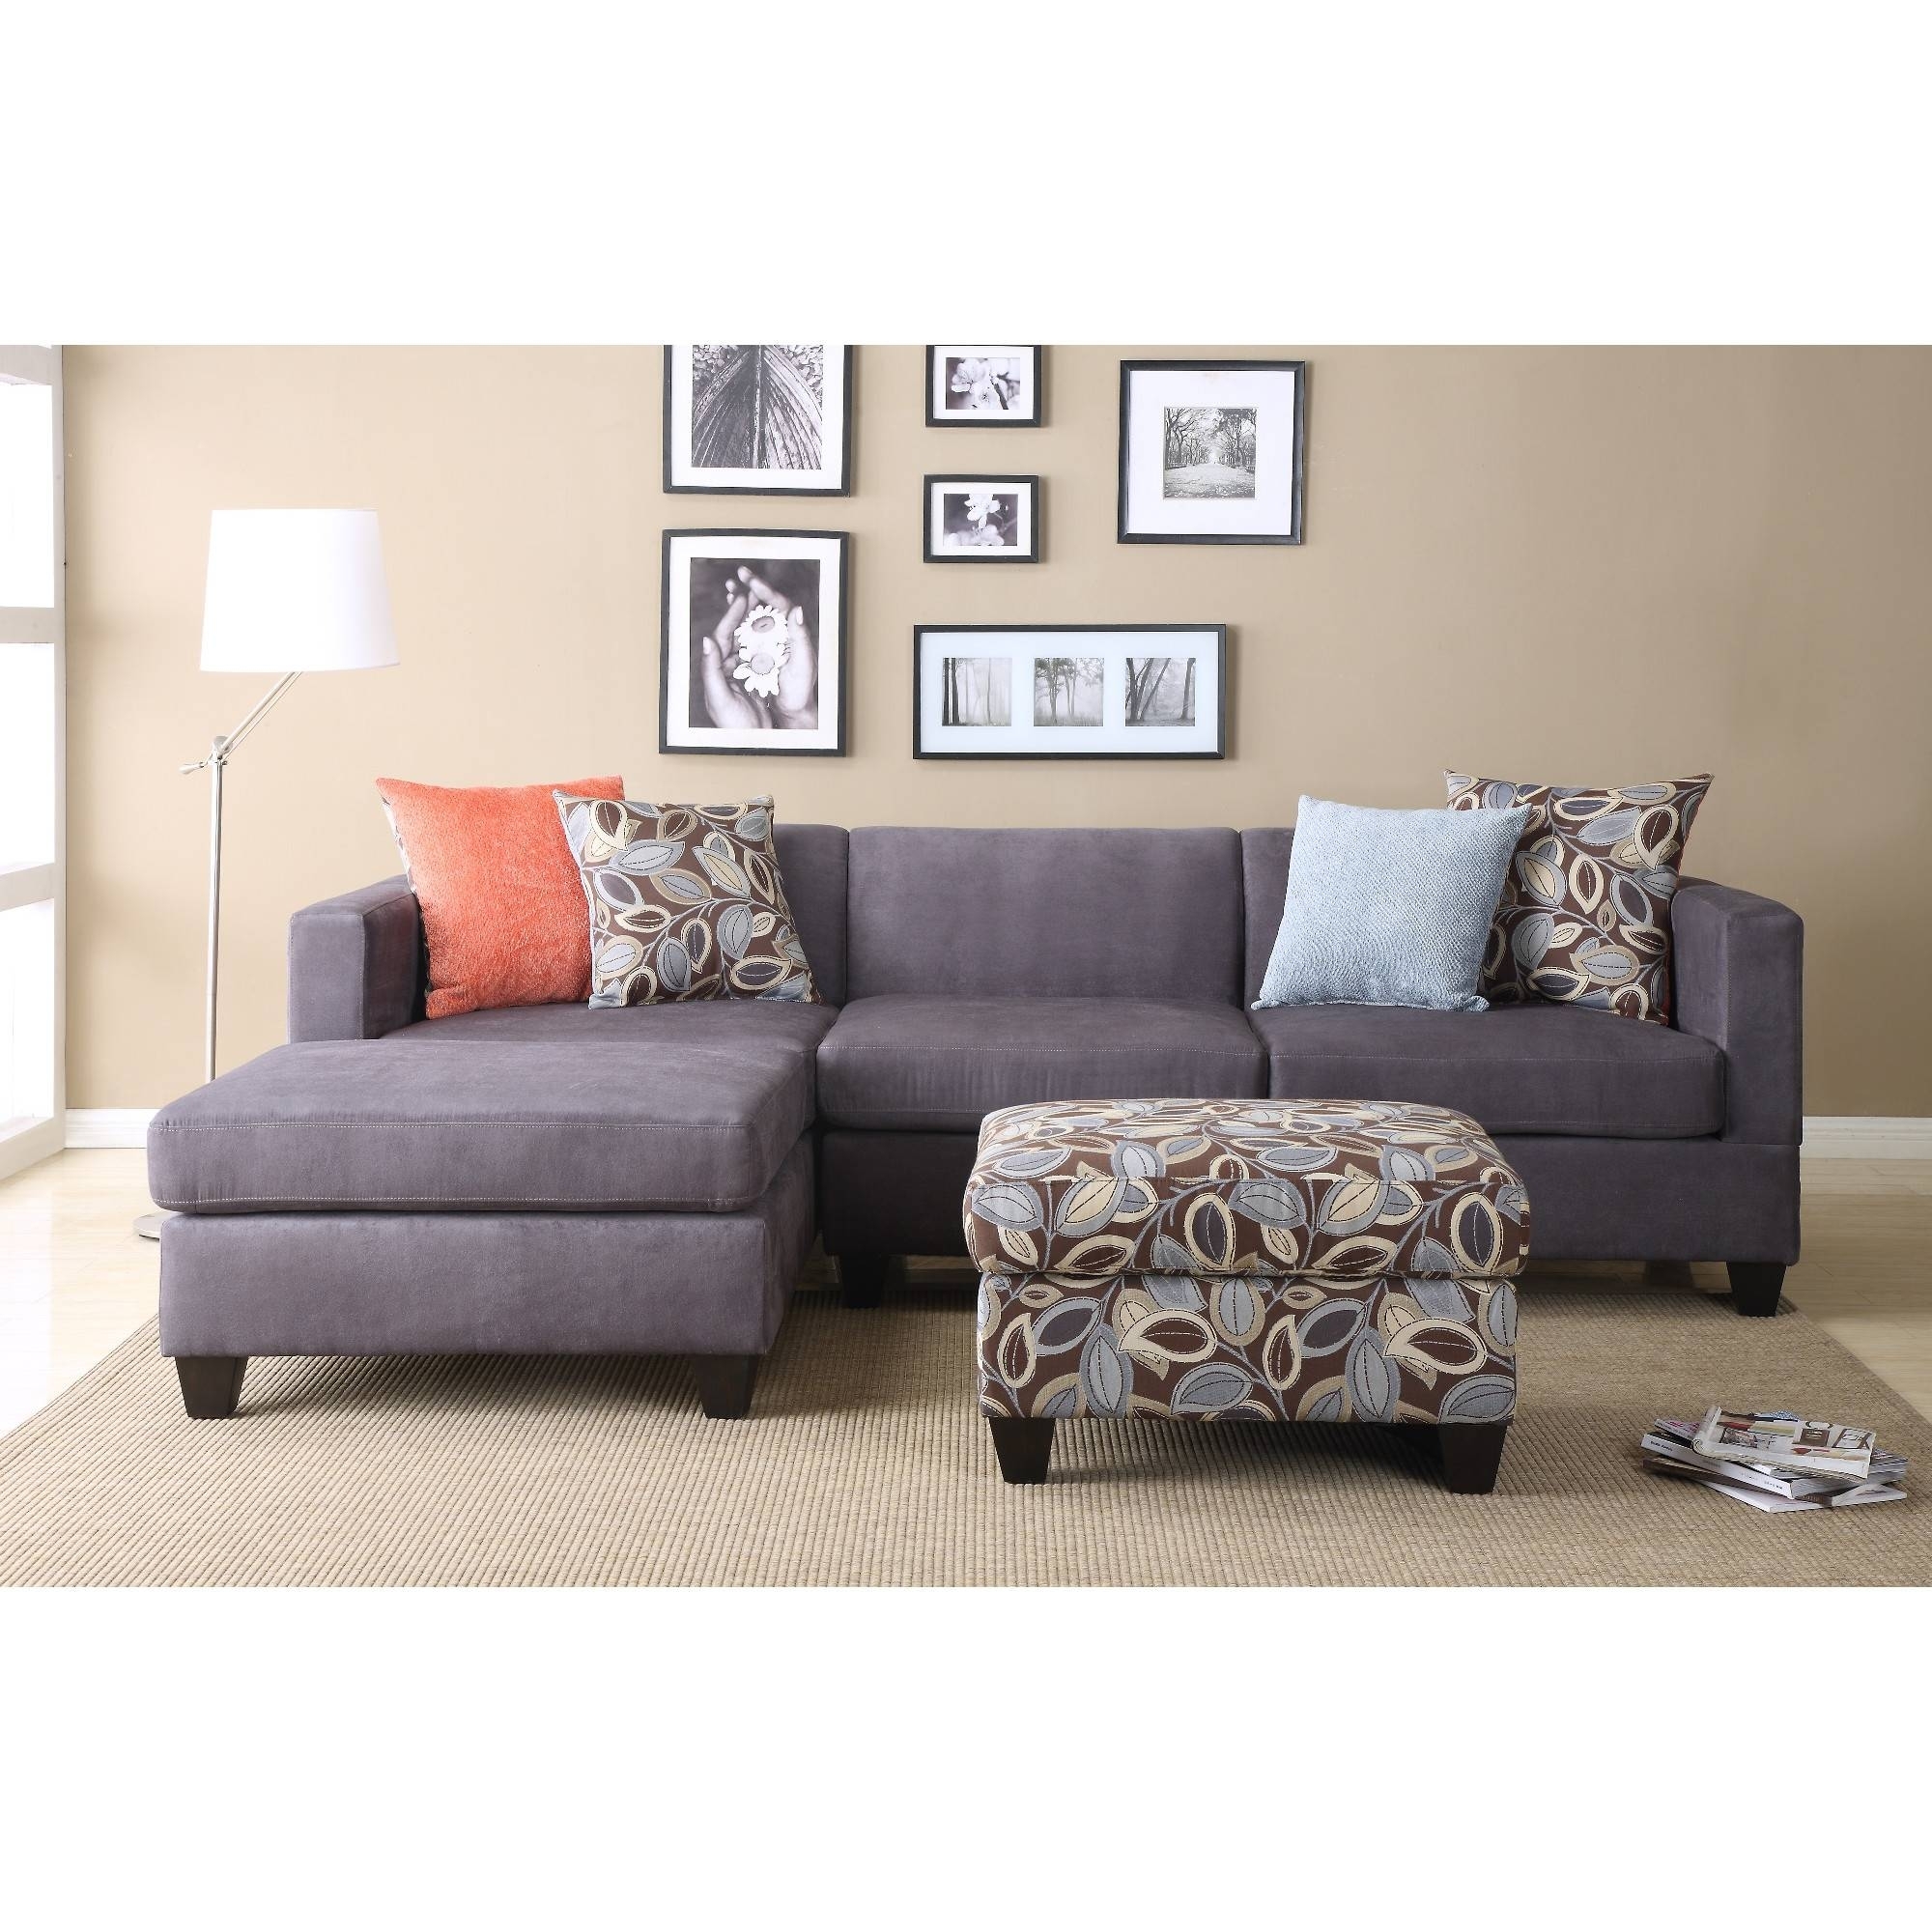 2 pieces sectional sofa in smooth charcoal finish microfiber with